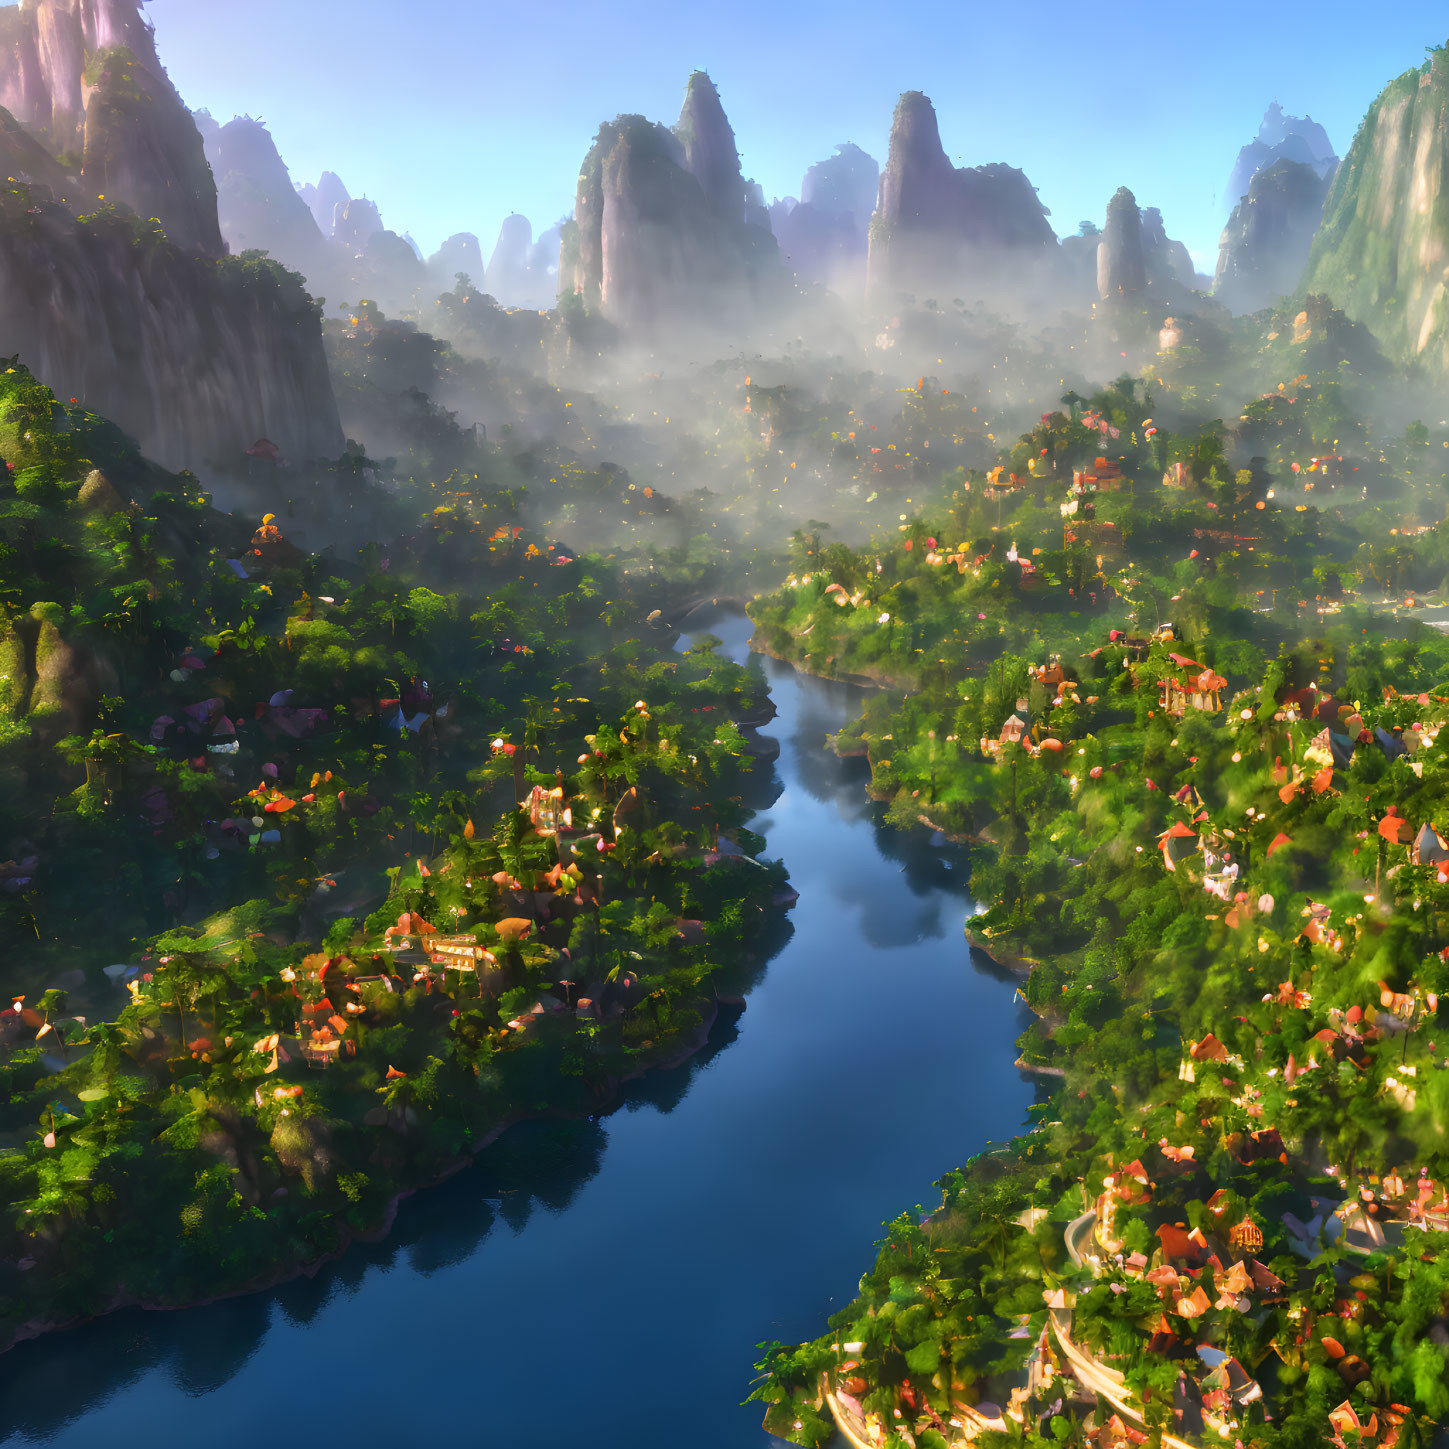 Vibrant fantasy landscape with river, greenery, mist, and settlements